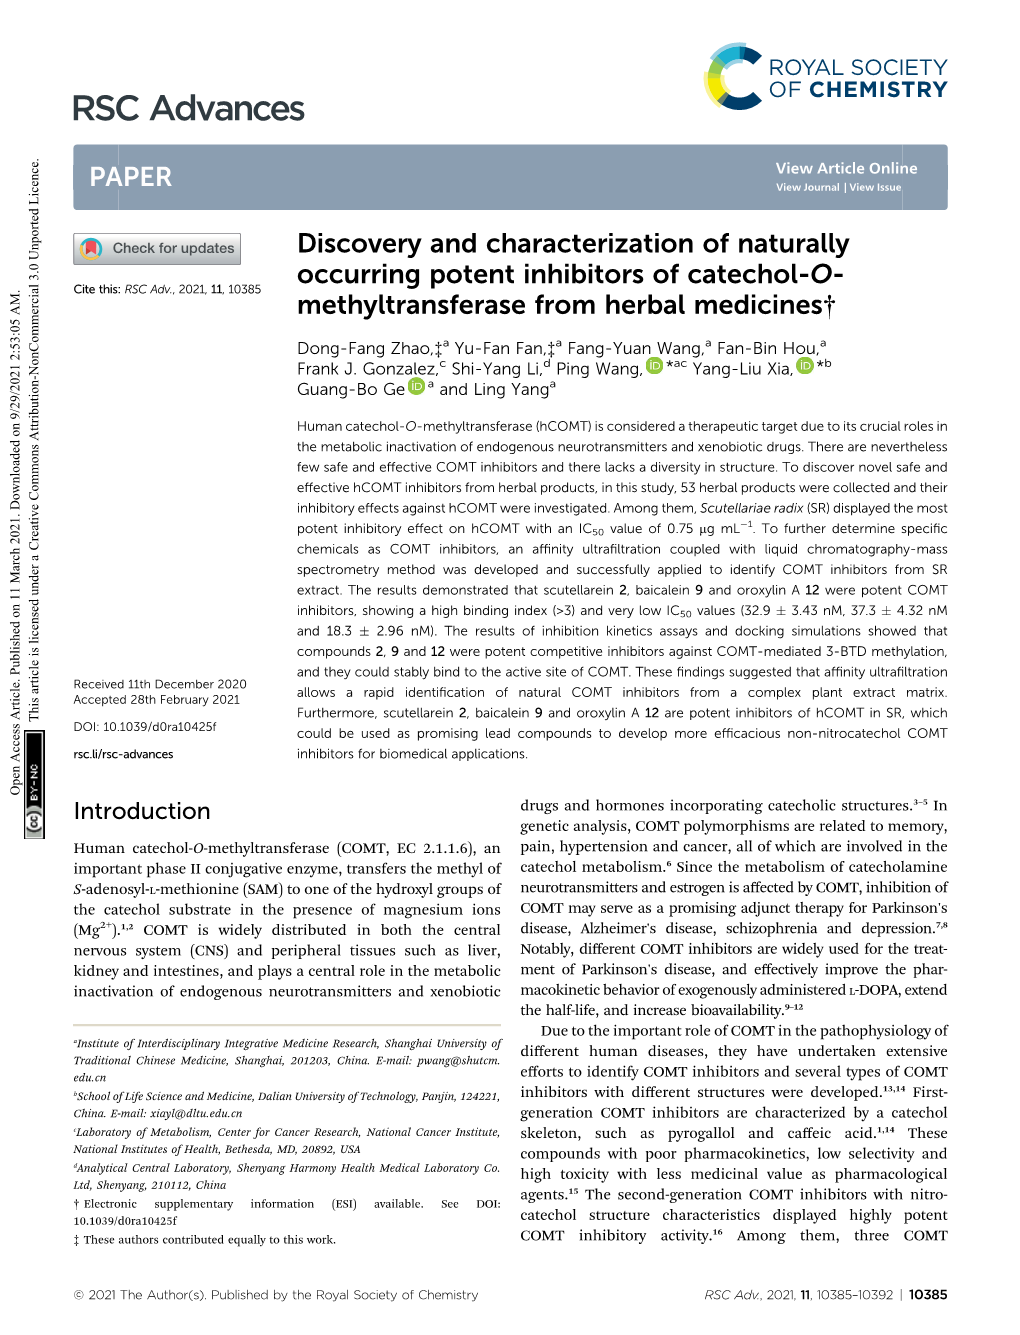 Discovery and Characterization of Naturally Occurring Potent Inhibitors of Catechol-O-Methyltransferase from Herbal Medicines